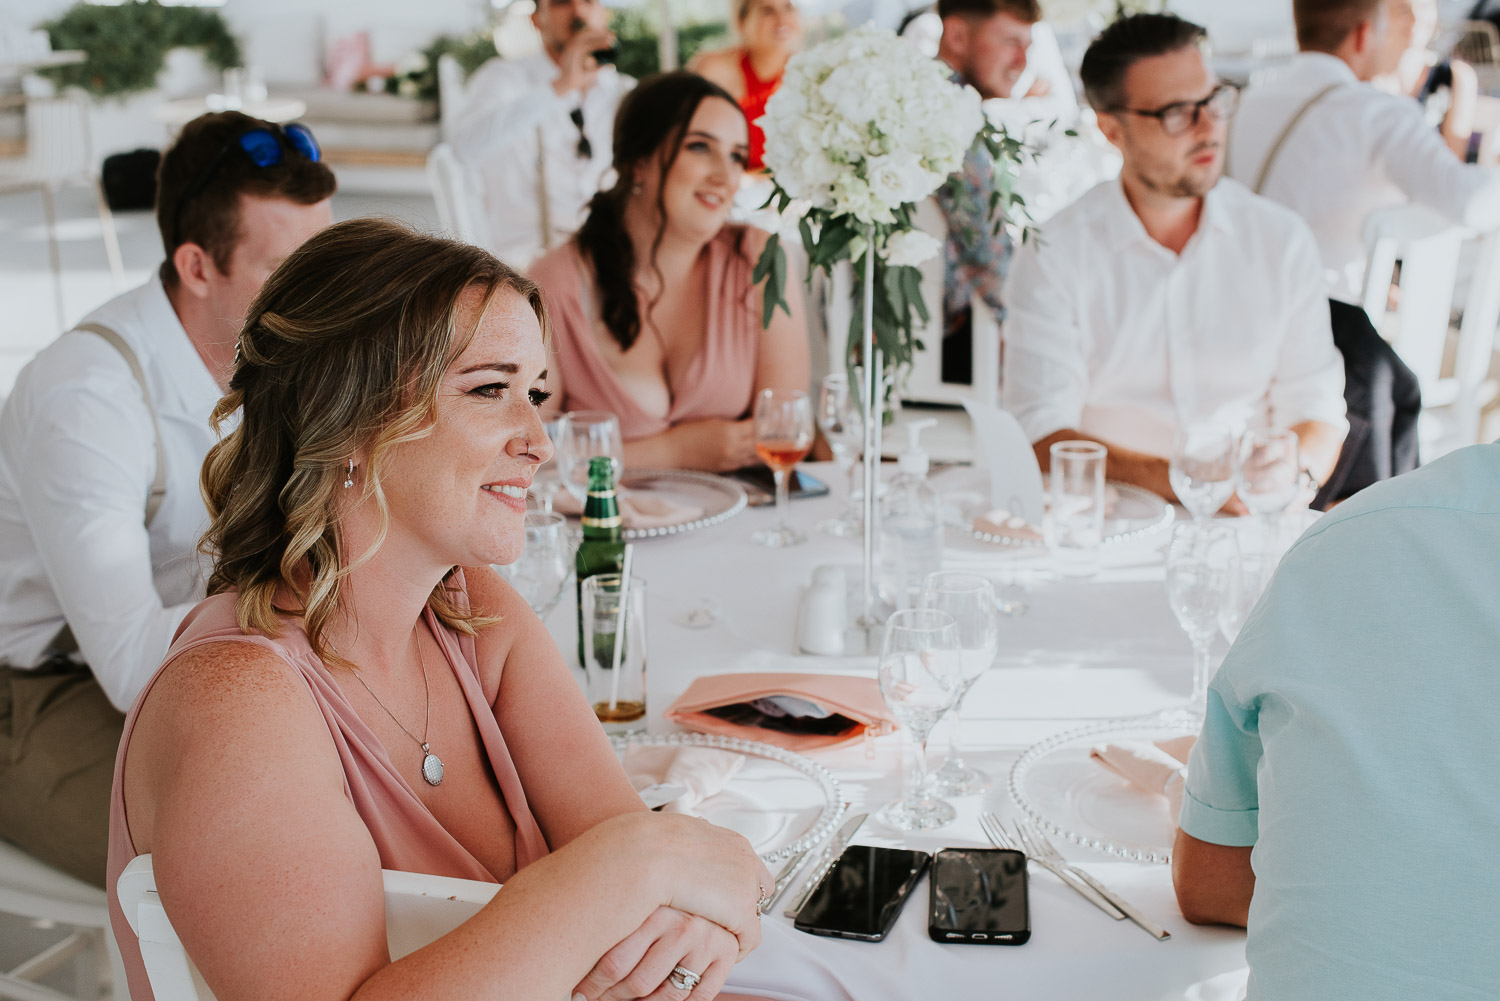 Wedding photographer Santorini: close up of guests sat at their table in the shade smiling as they listen to the speeches by Ben and Vesna.